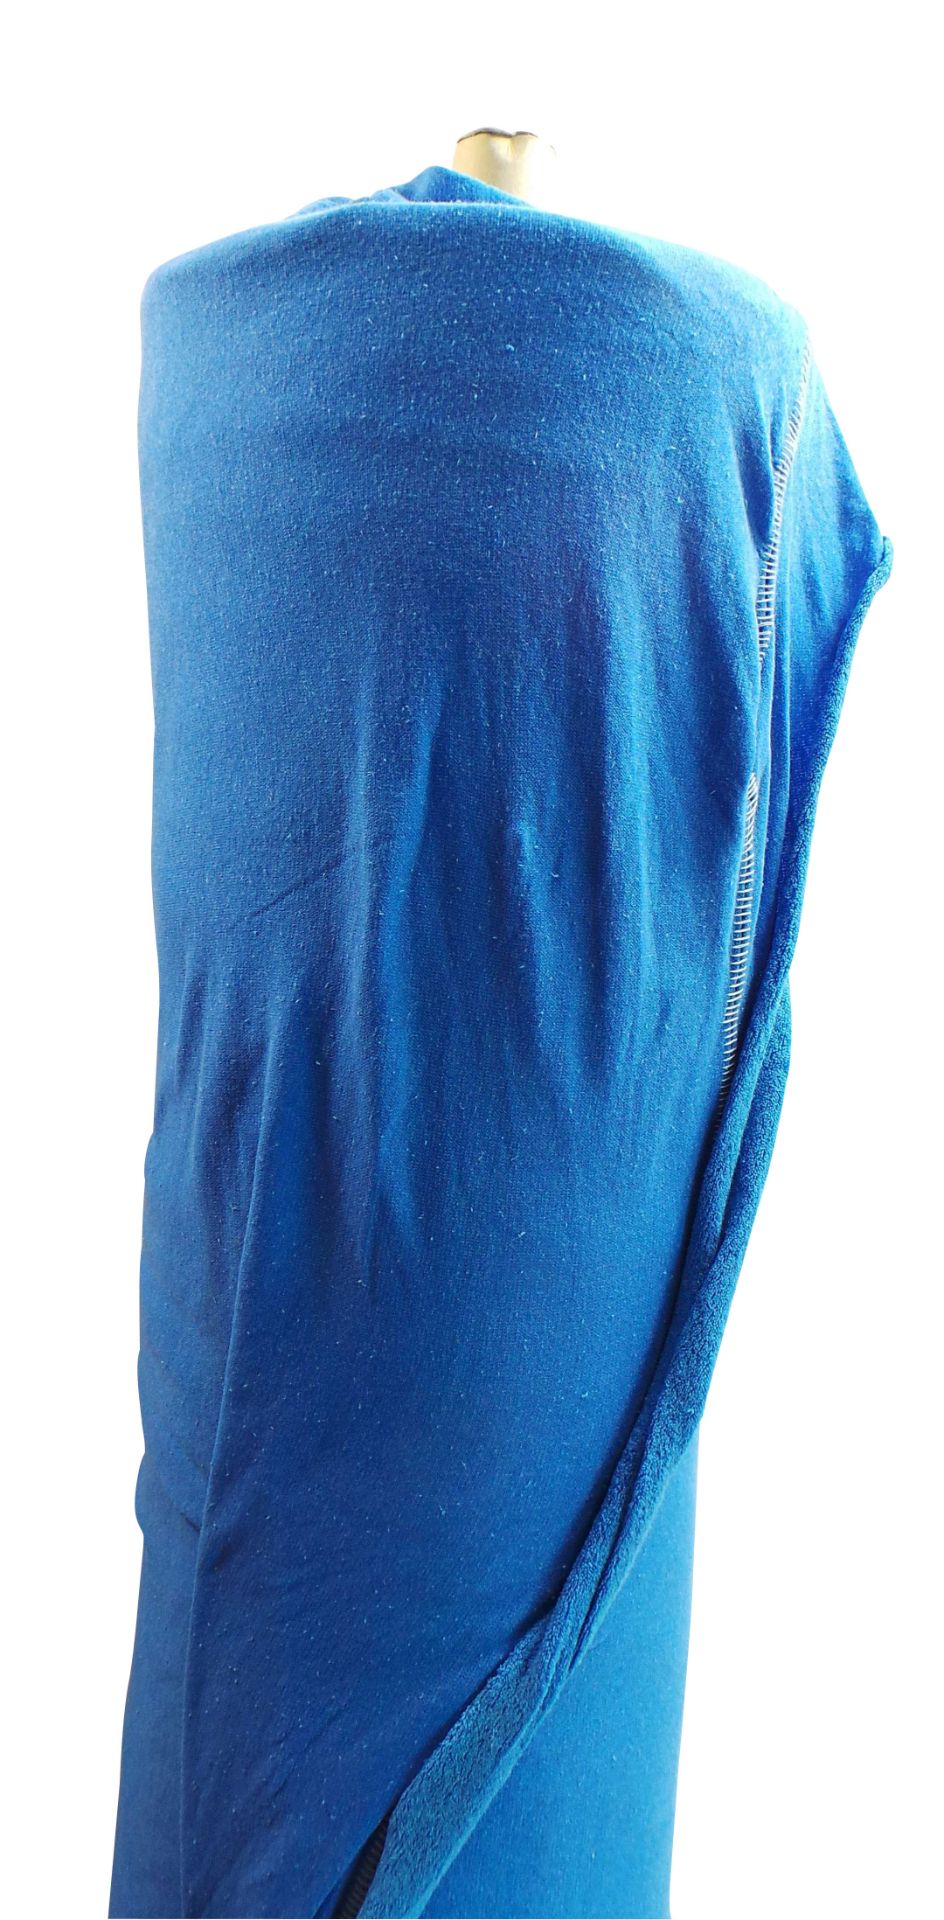 One Off Joblot of 60 Square Metres of Royal Blue Stretch Terry Towelling Fabrics - Image 4 of 5